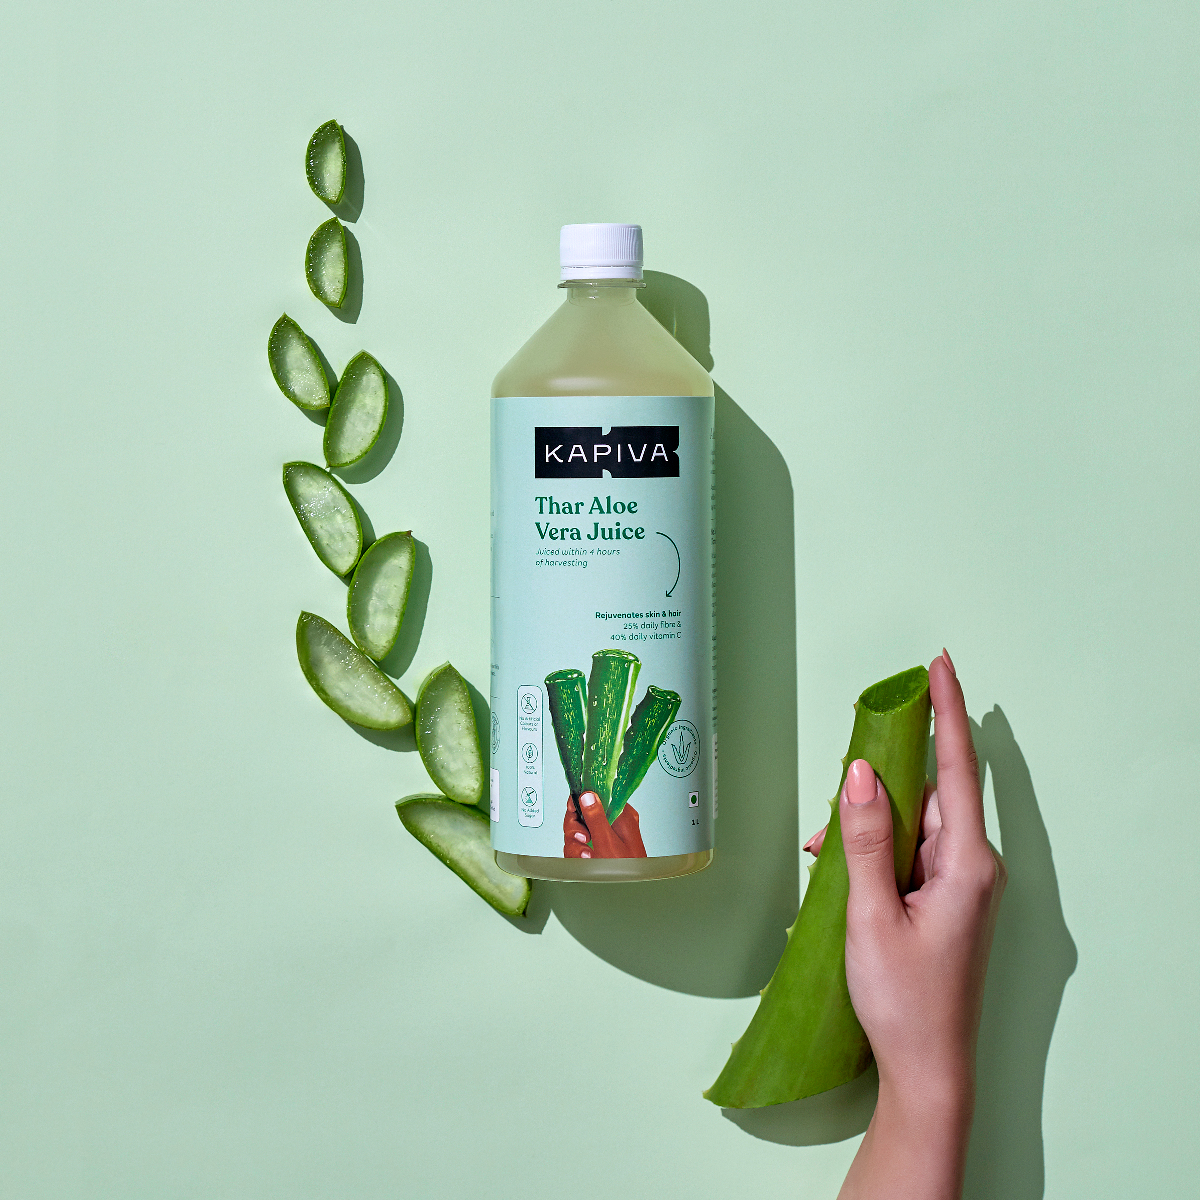 Take care of your skin, hair this monsoon season with products made from Aloe Vera & Neem